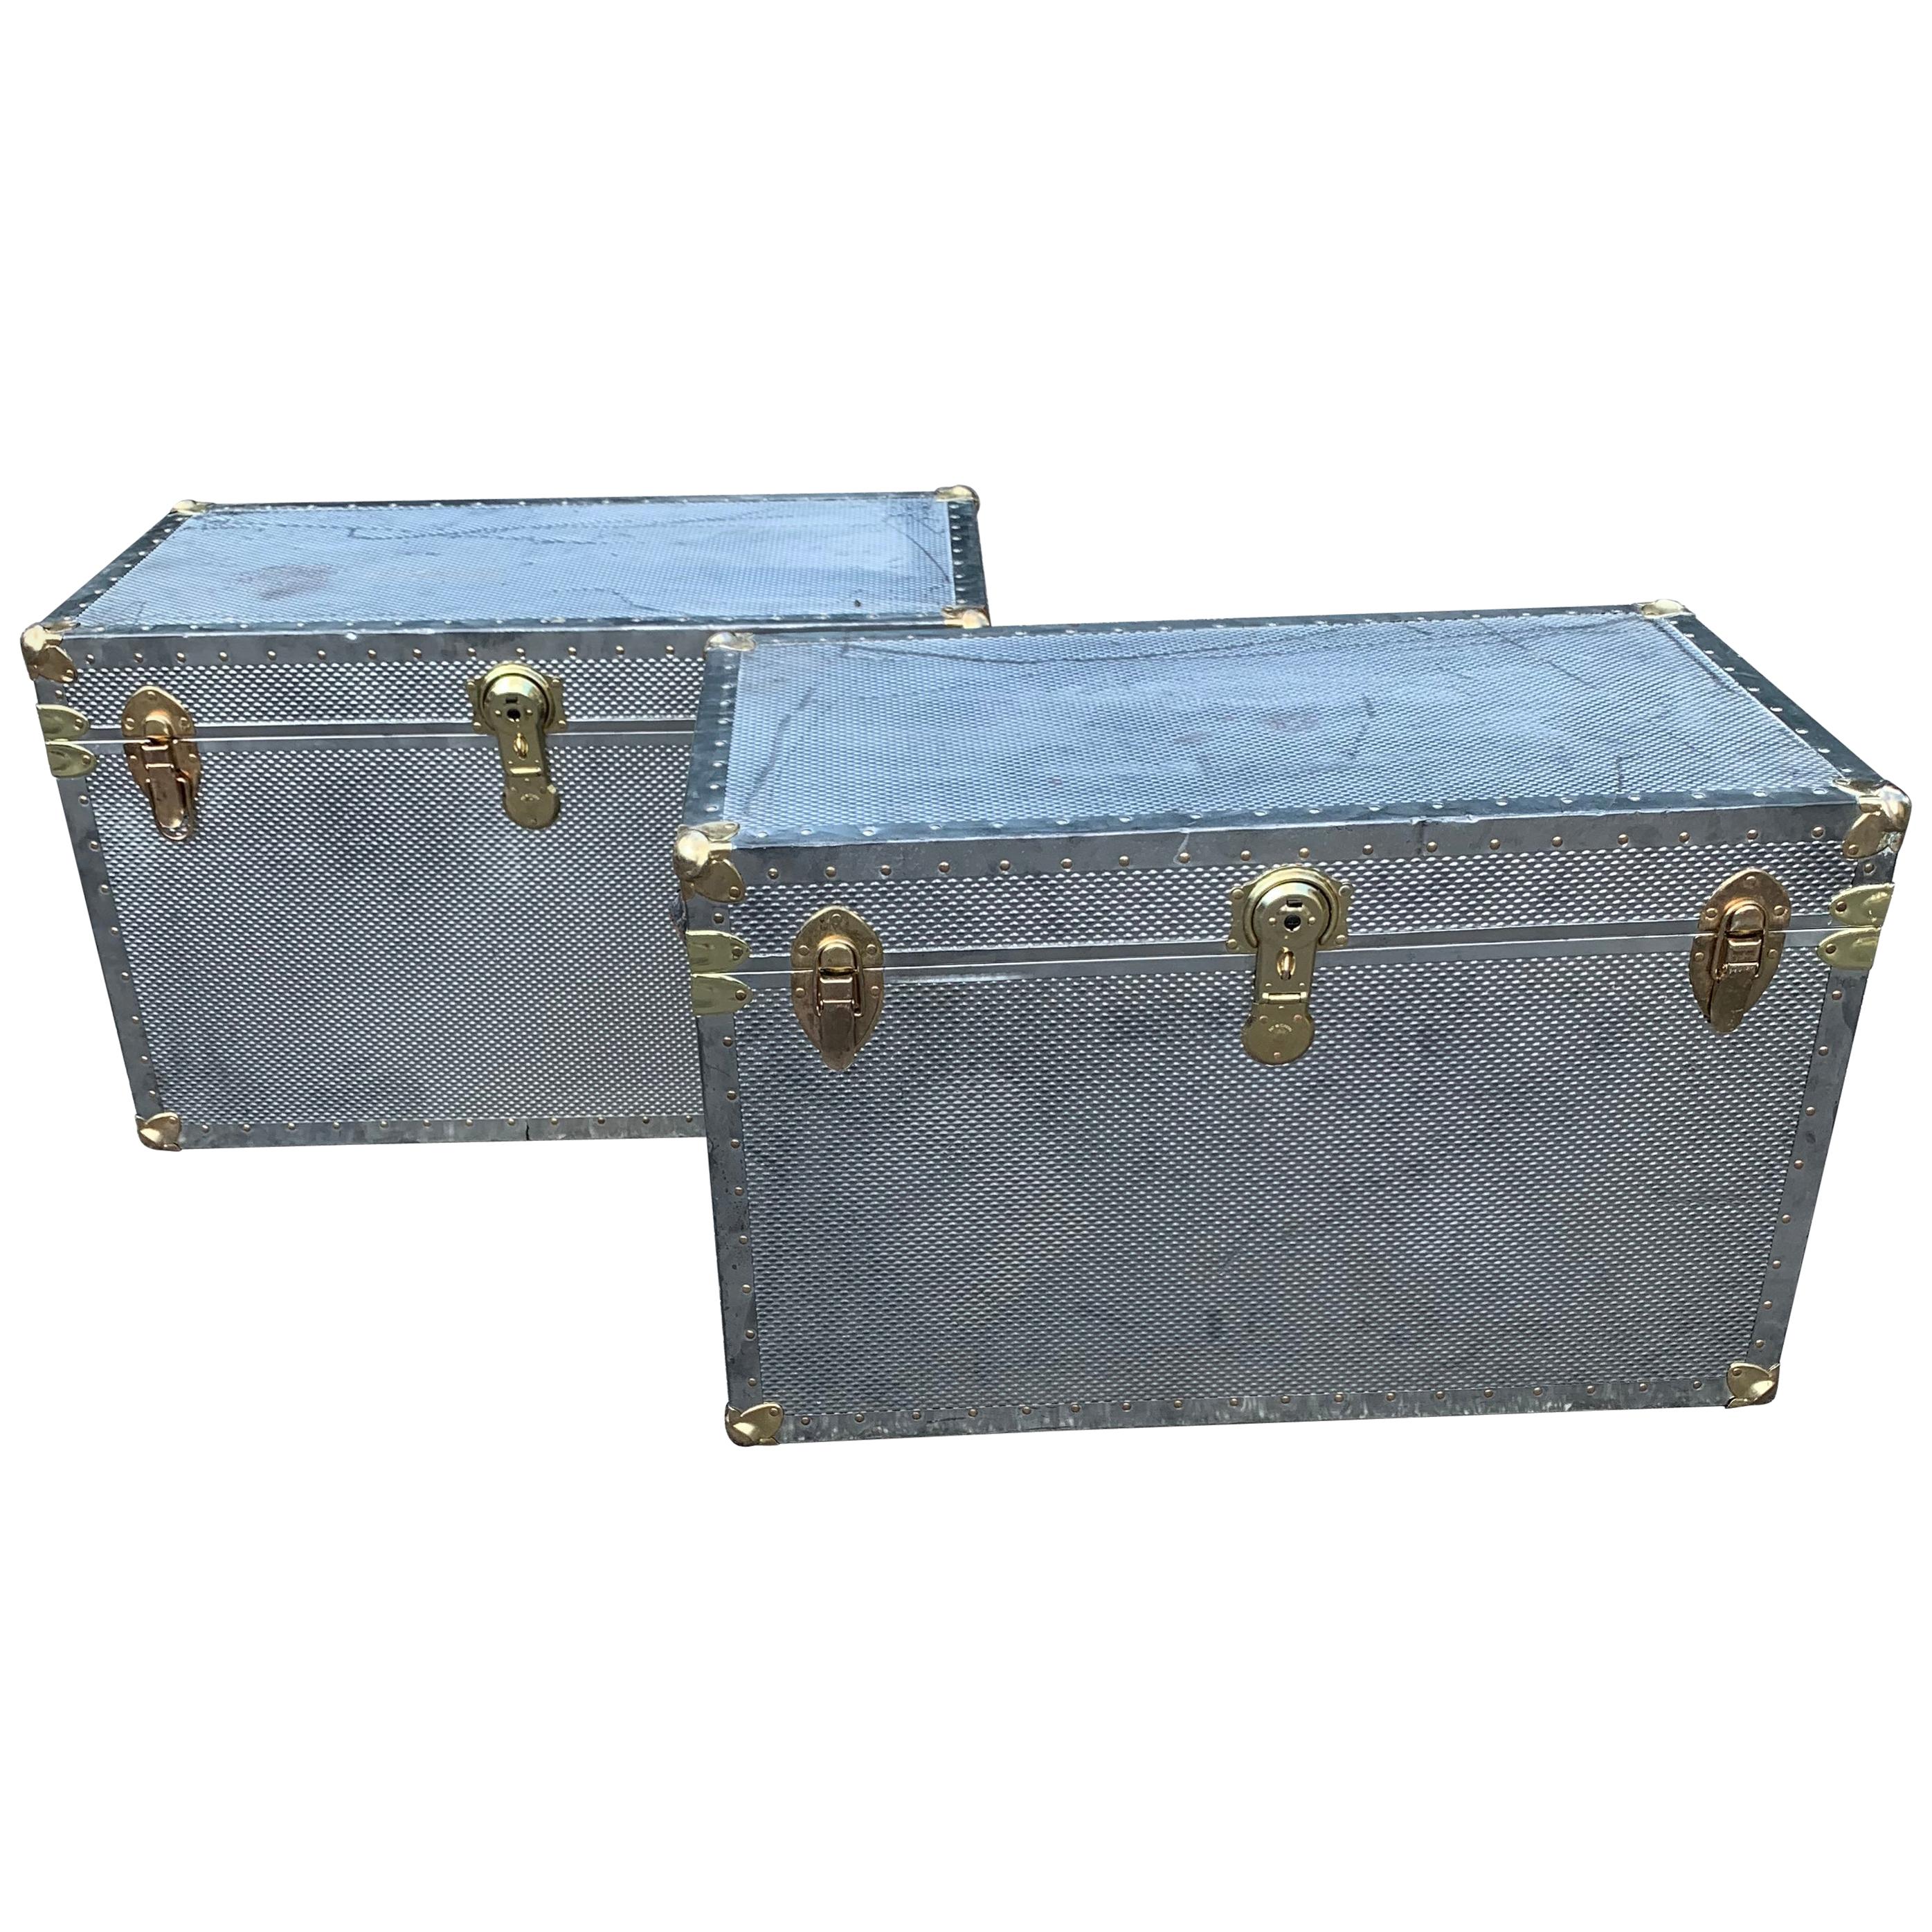 Two Polished Diamond Aluminum and Brass Streamer Trunks